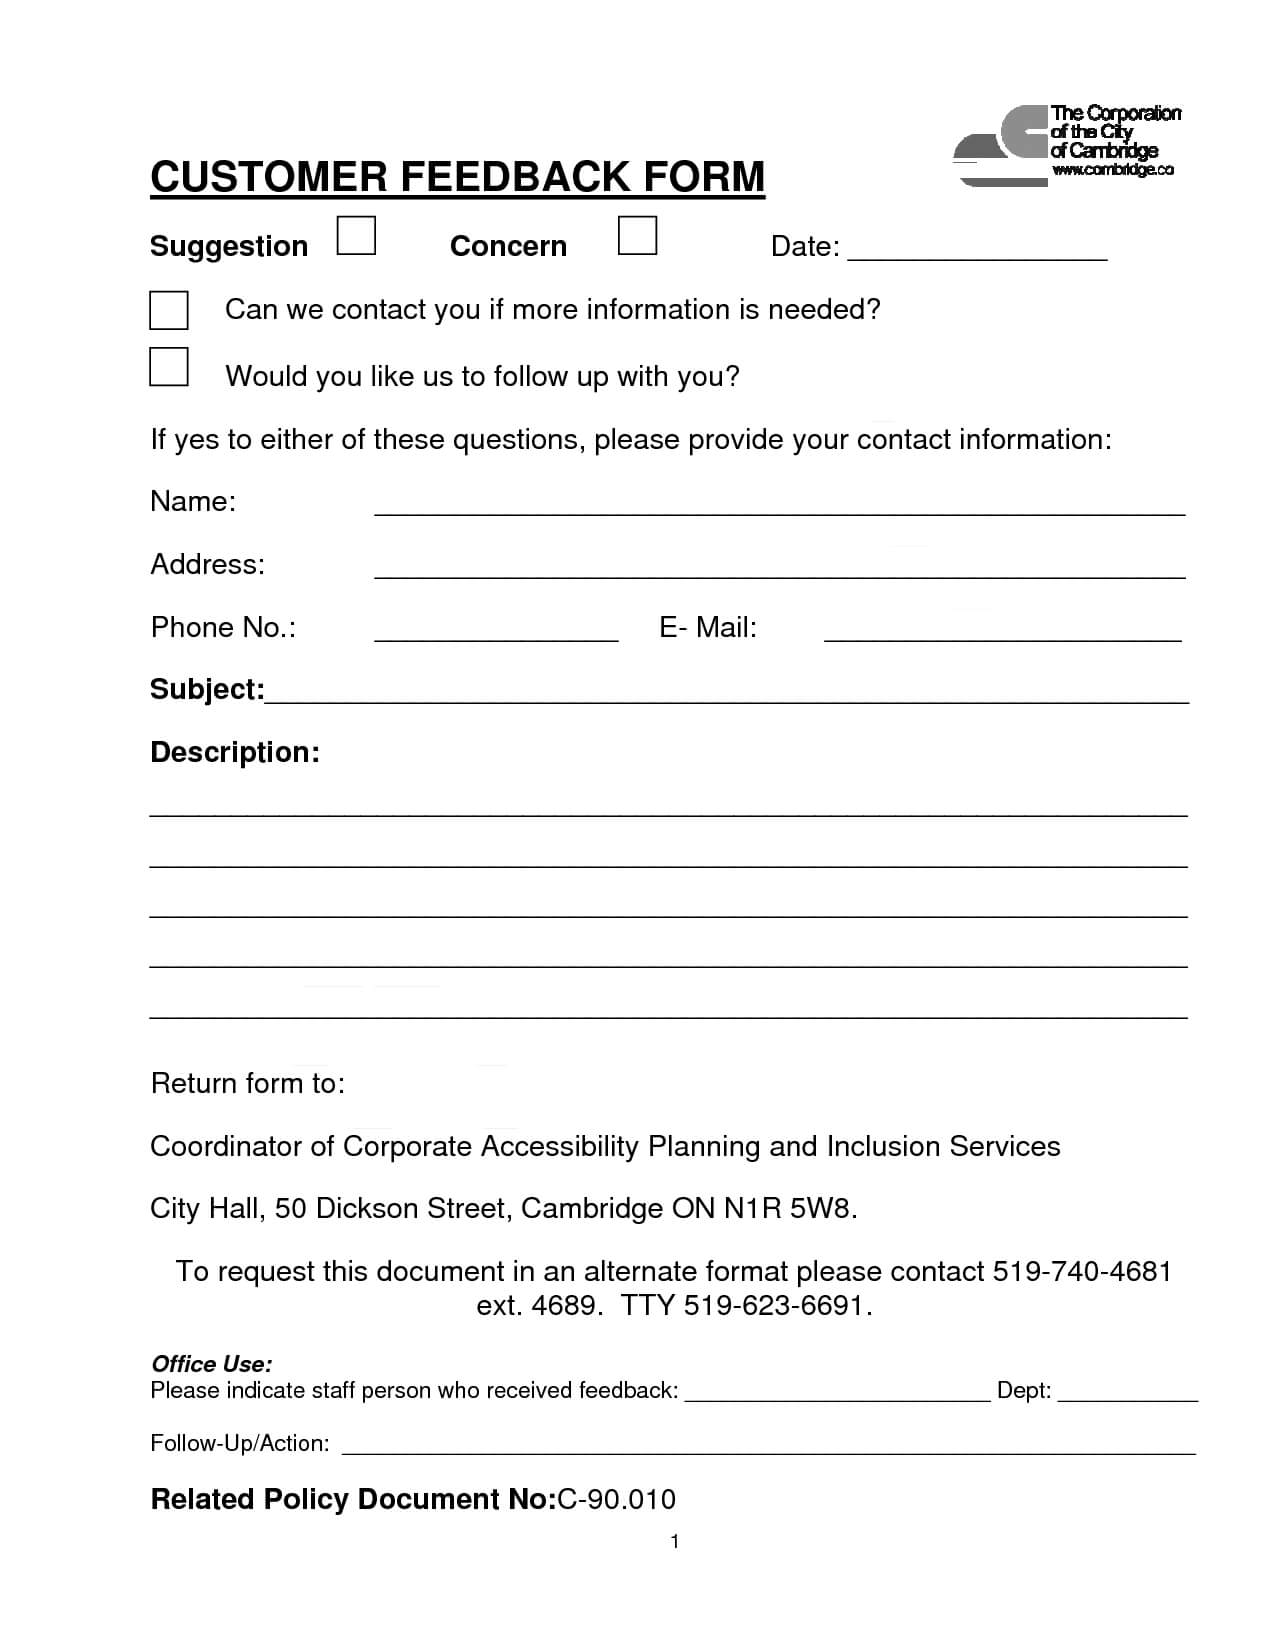 Customer Contact Form | Customer Feedback Form (Pdf Download Throughout Word Employee Suggestion Form Template